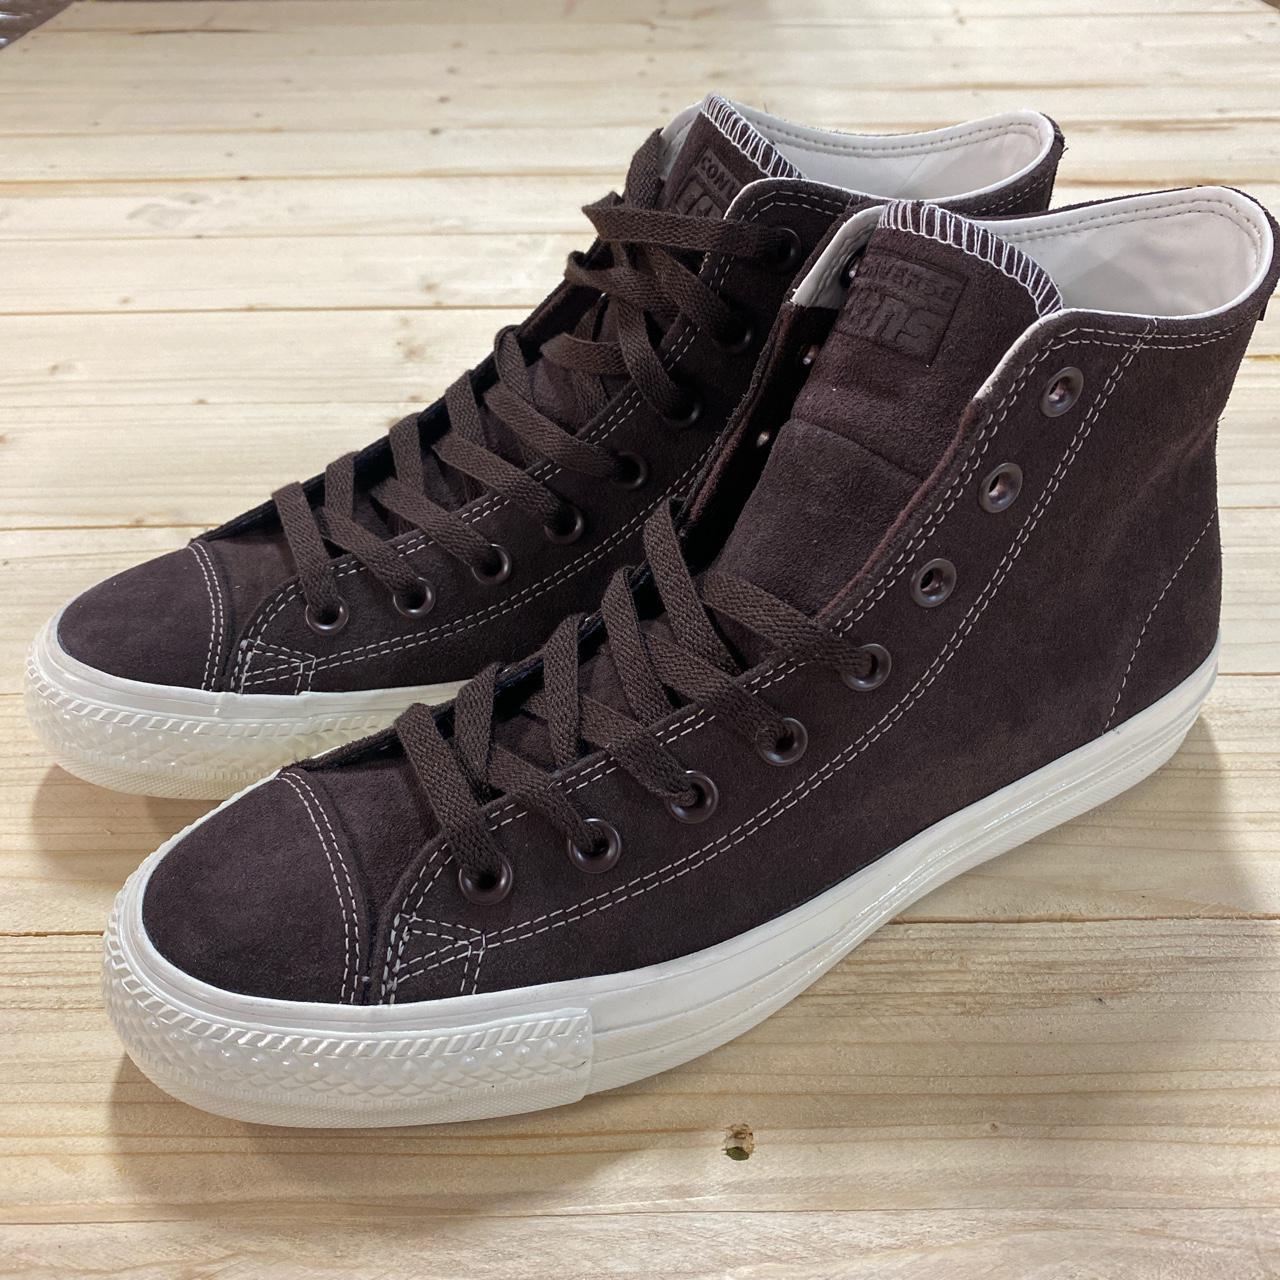 Product Image 2 - Converse CTS pro
Size 9.5
Brand new

#converse